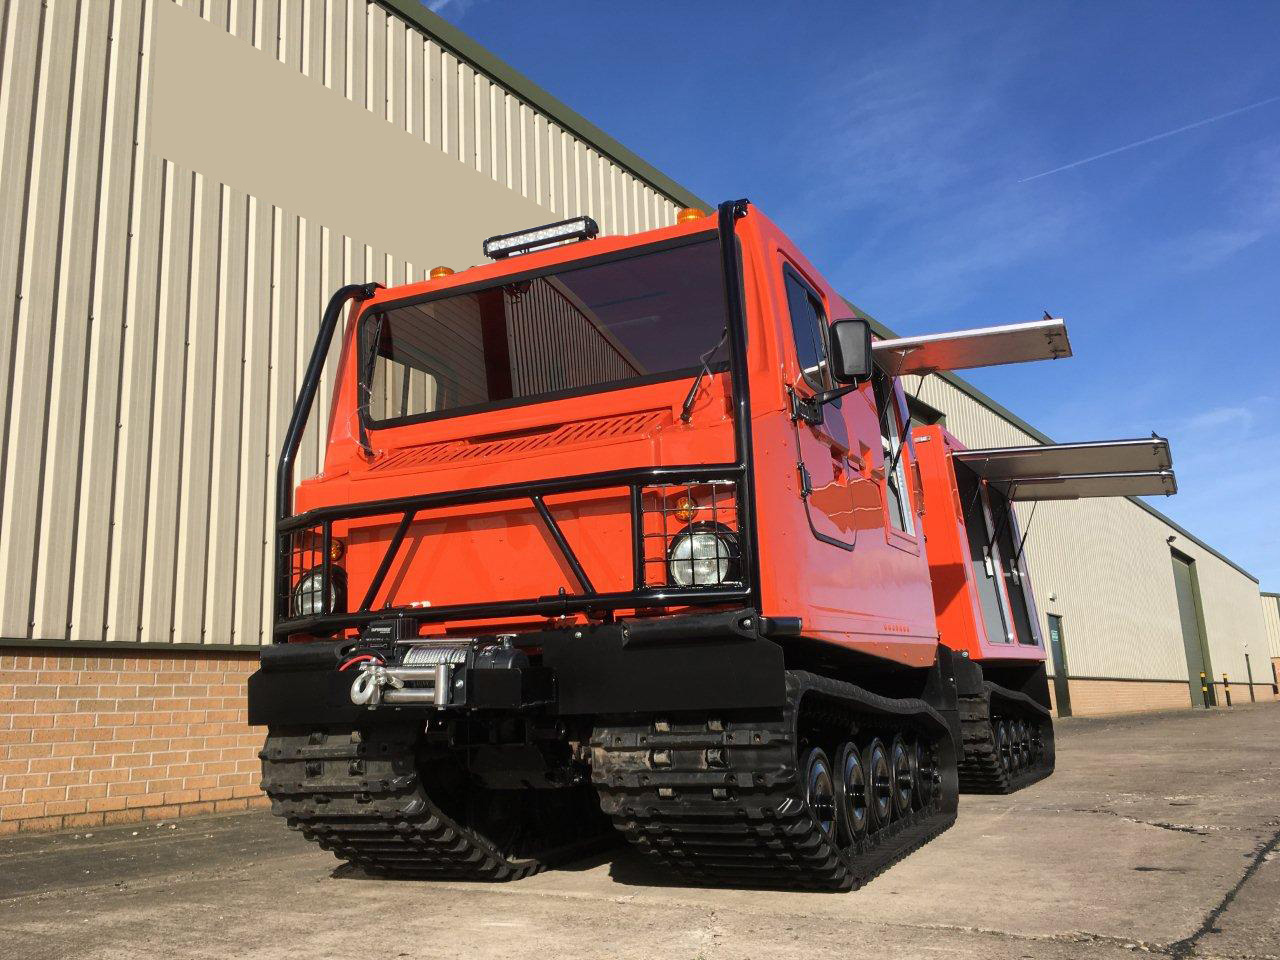 <a href='/index.php/drivetrain/left-hand-drive/50253-hagglund-bv206-multi-purpose-vehicle-50253' title='Read more...' class='joodb_titletink'>Hagglund BV206 Multi-Purpose Vehicle - 50253</a>